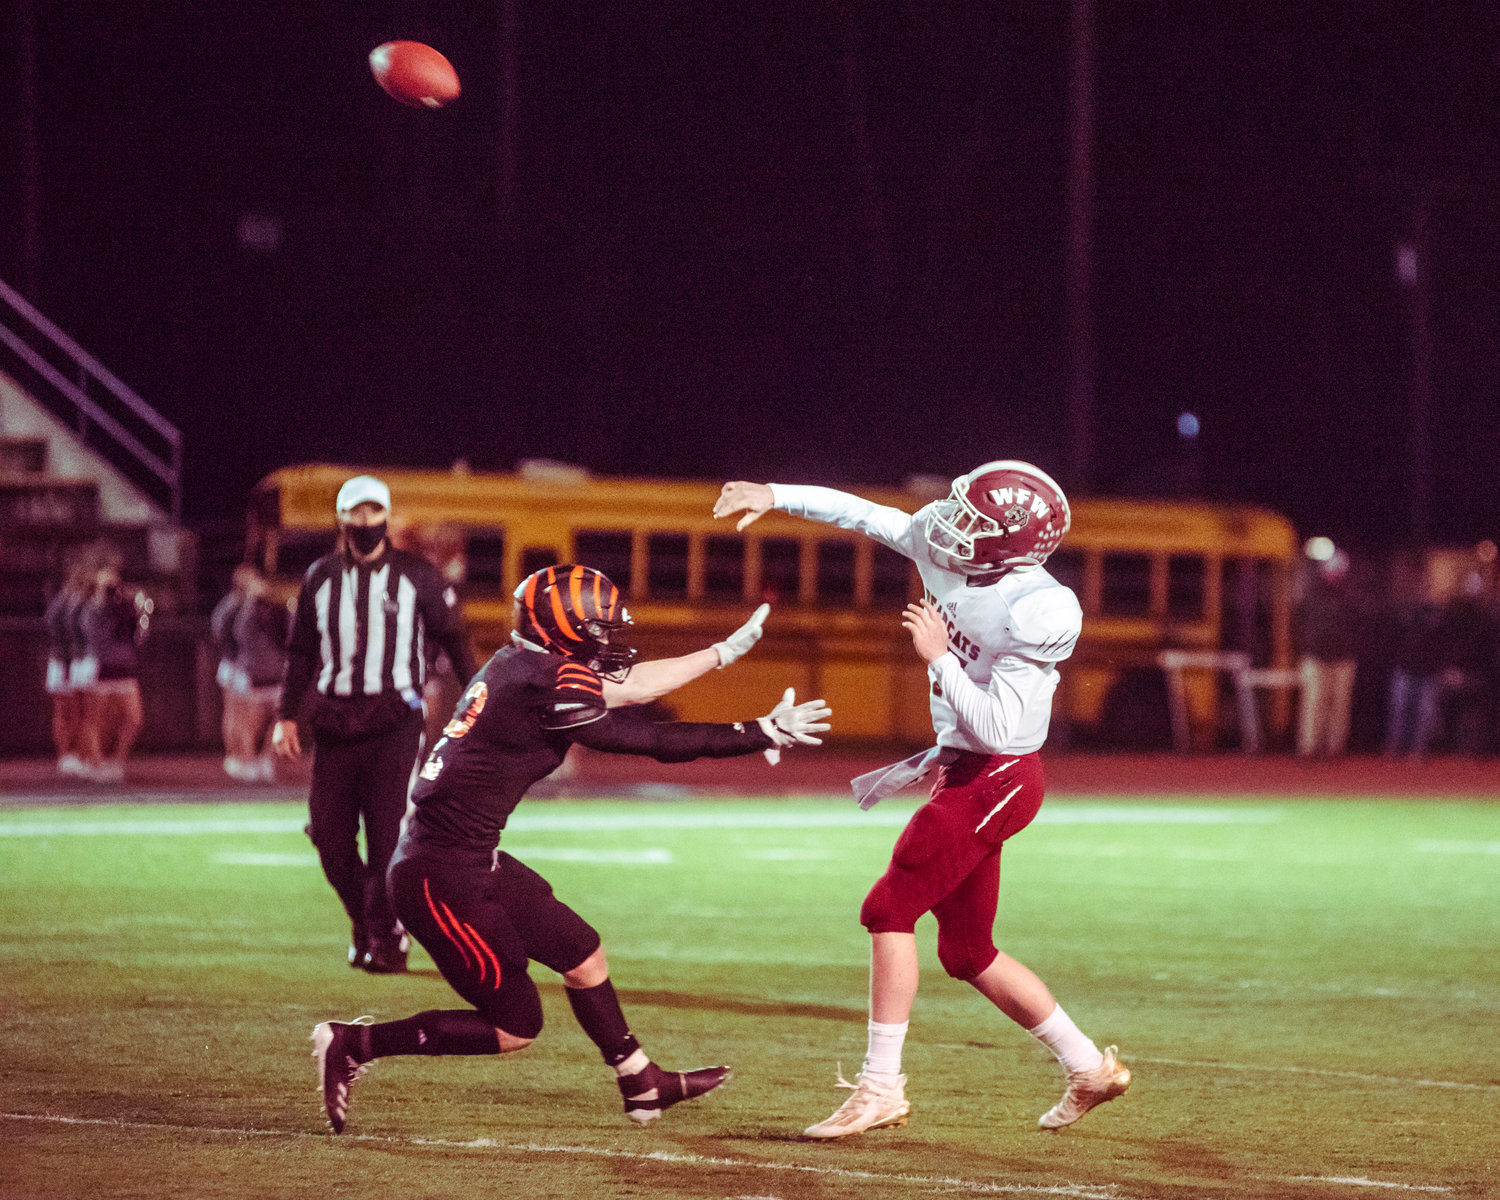 W.F. West's Quarterback Gavin Fugate (17) throws a pass during the Swamp Cup football game against Centralia Saturday night at Tiger Stadium.